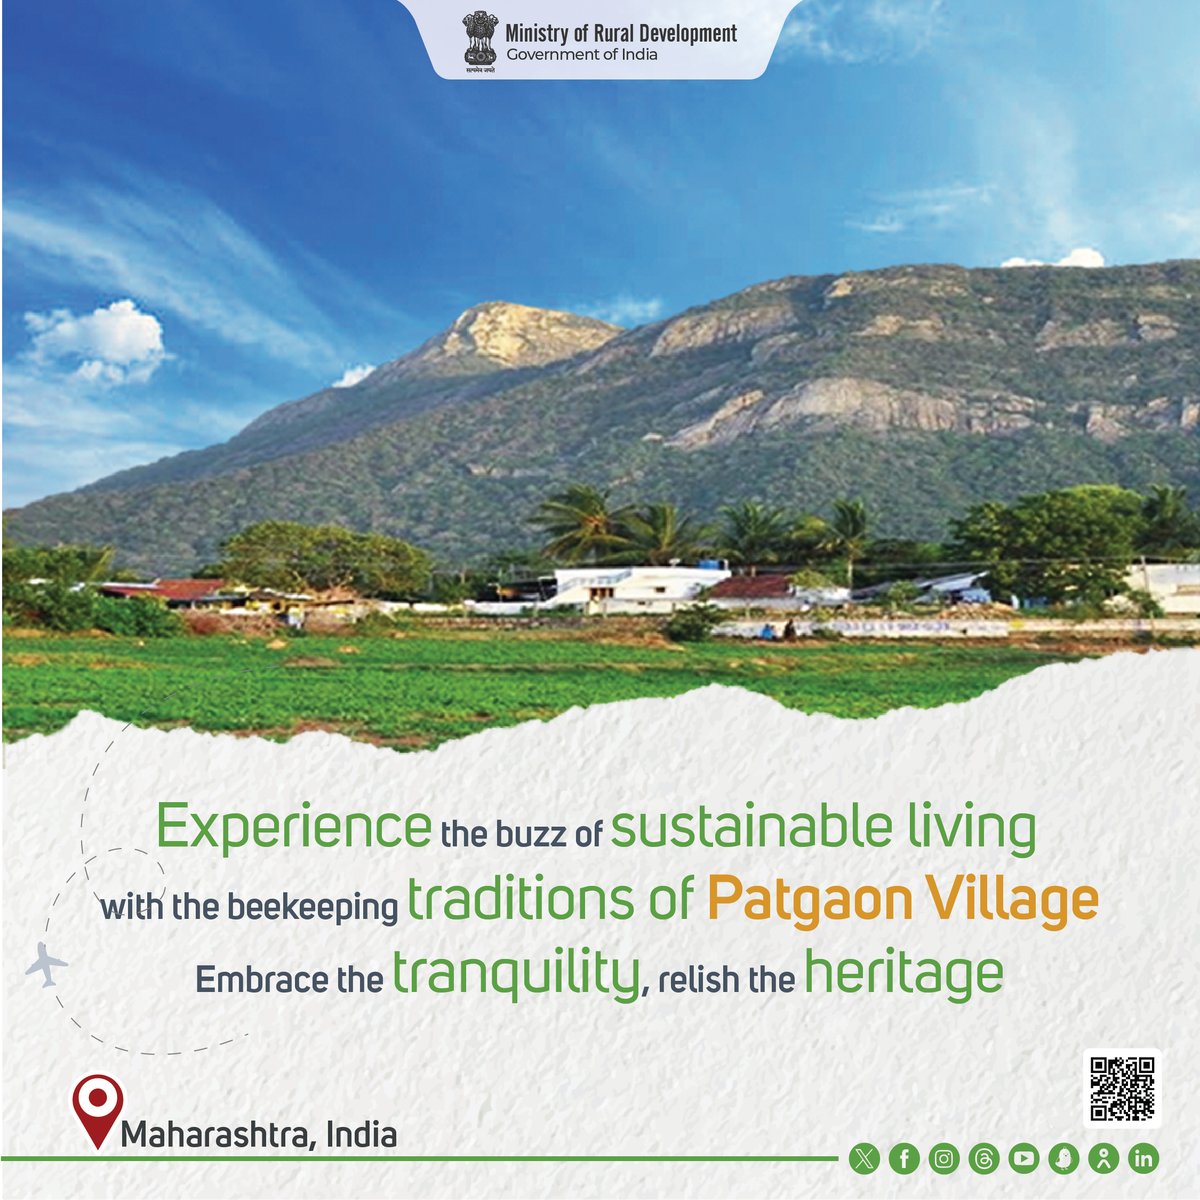 #EhsaasGrameenBharatKa | Patgaon is more than a destination, it’s a sustainable agri-tourism paradise. Unveil the essence of #RuralIndia at Patgaon. A sanctuary where tradition meets innovation, and nature’s bounty flourishes. #MoRD #RuralTourism #Tourism #Travel #Travelogue